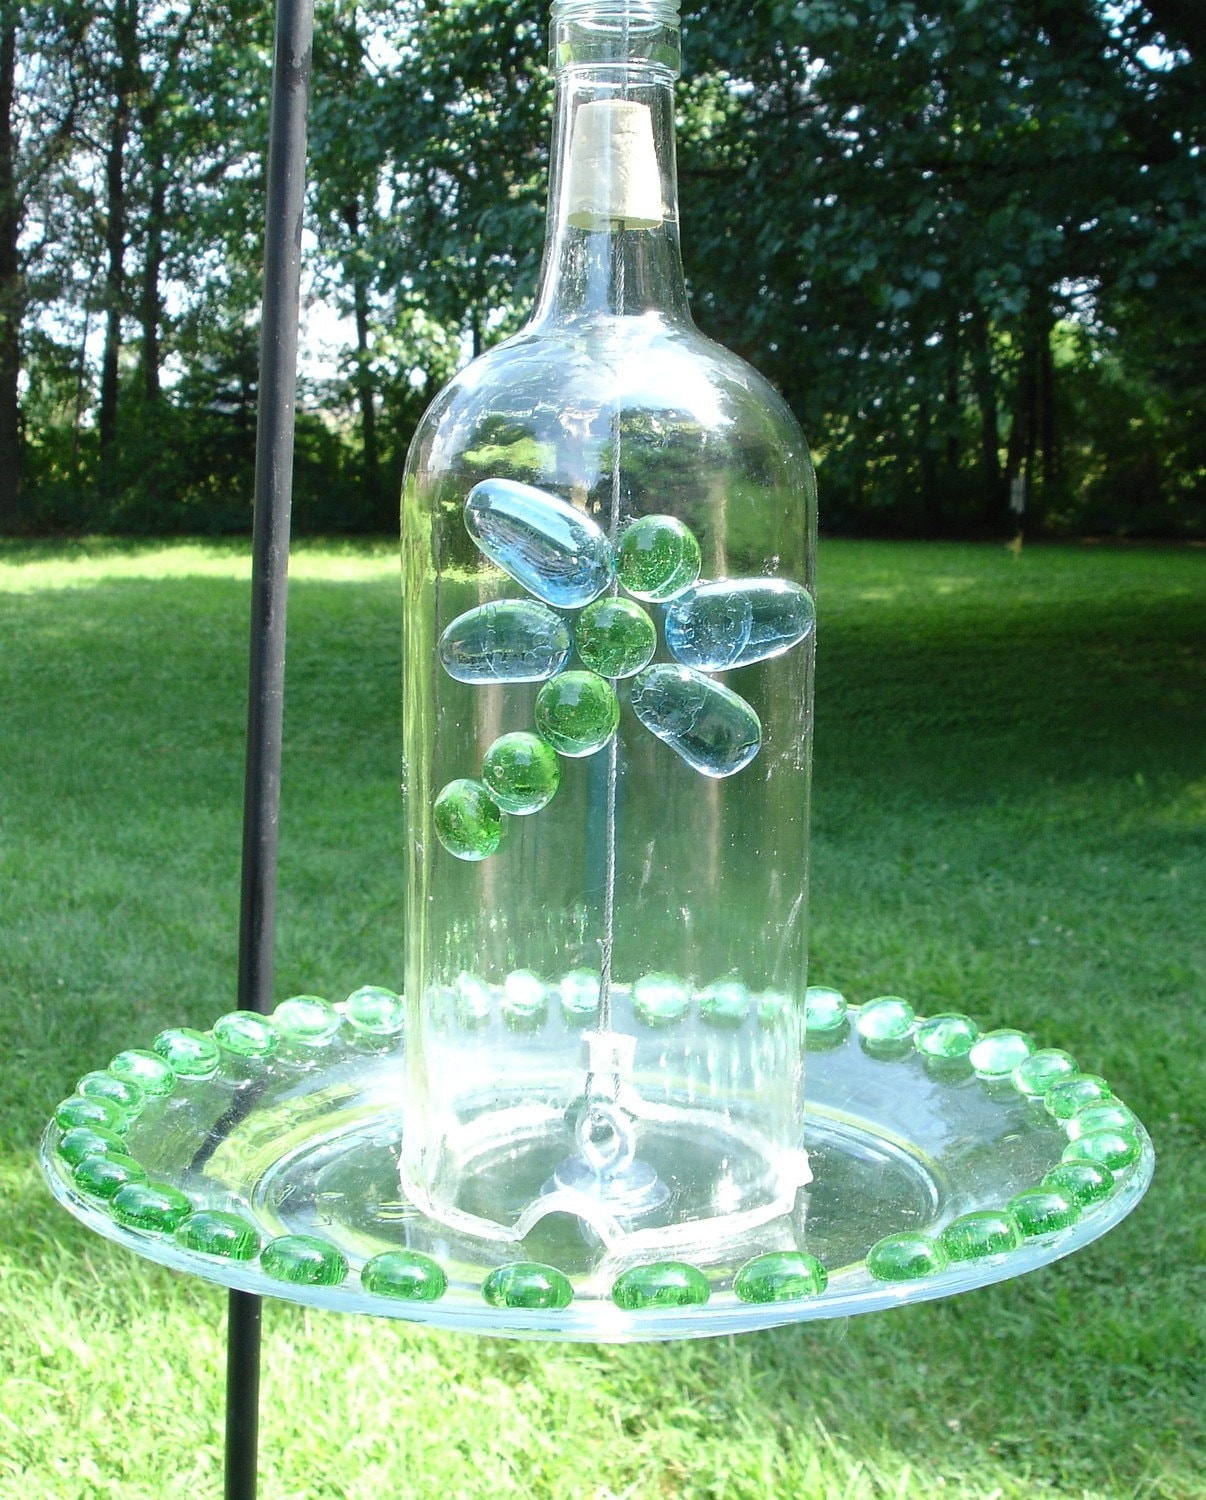 Bird feeder from Large Recycled Wine Bottle